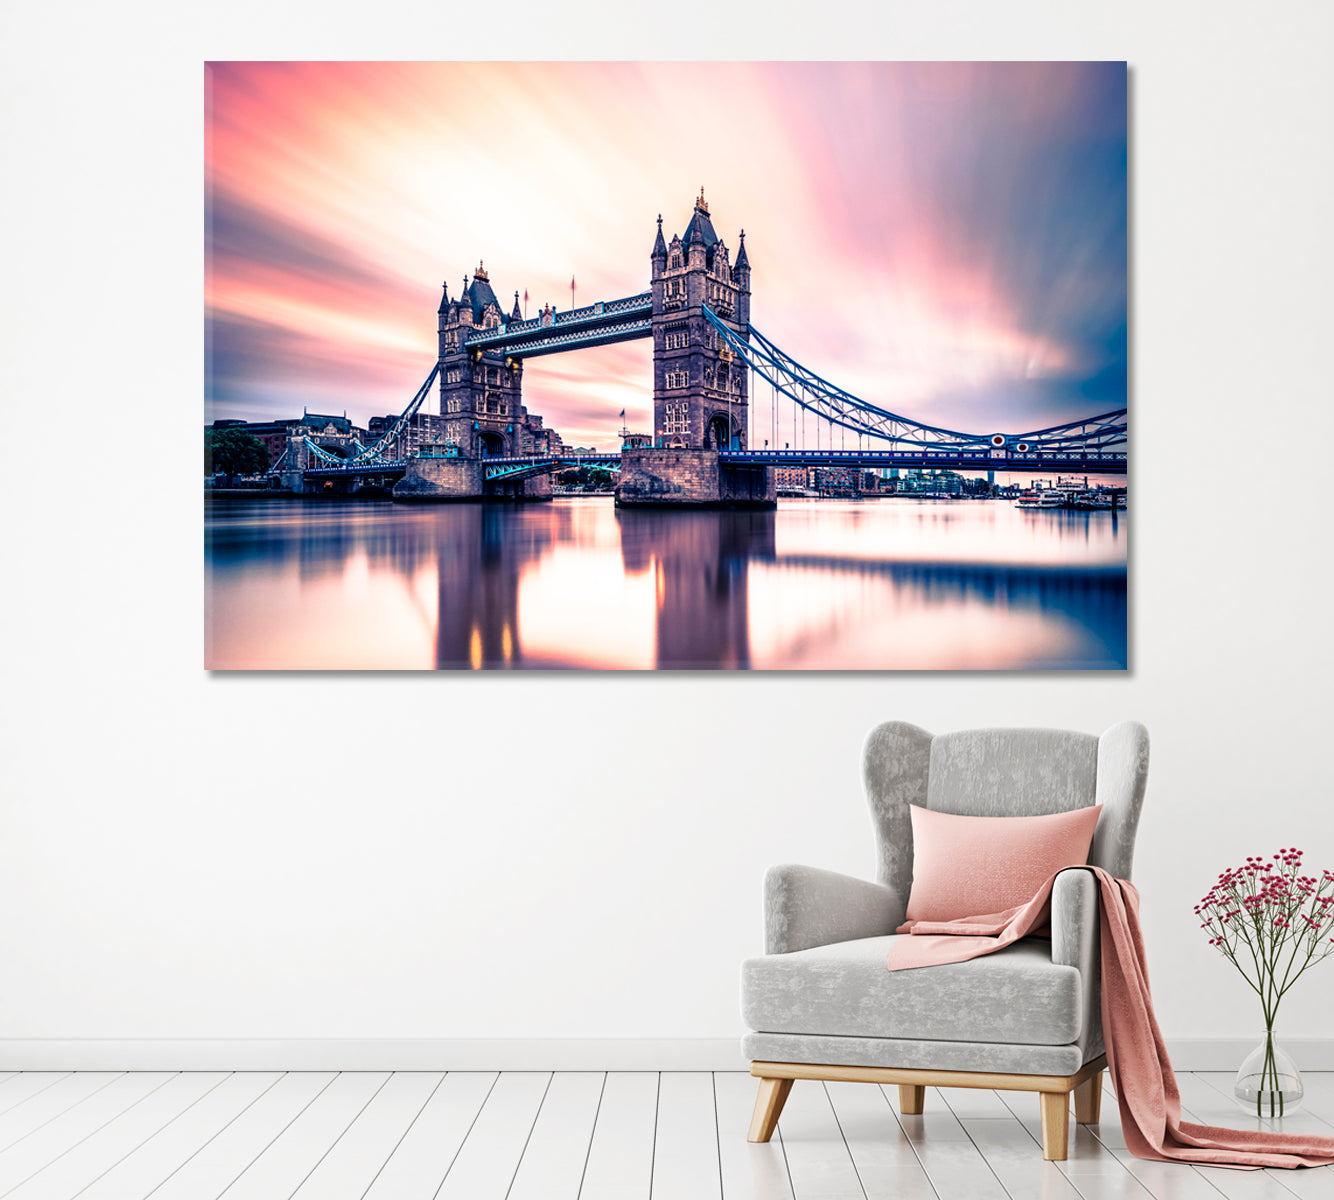 Thames River and London Tower Bridge Canvas Print ArtLexy 1 Panel 24"x16" inches 